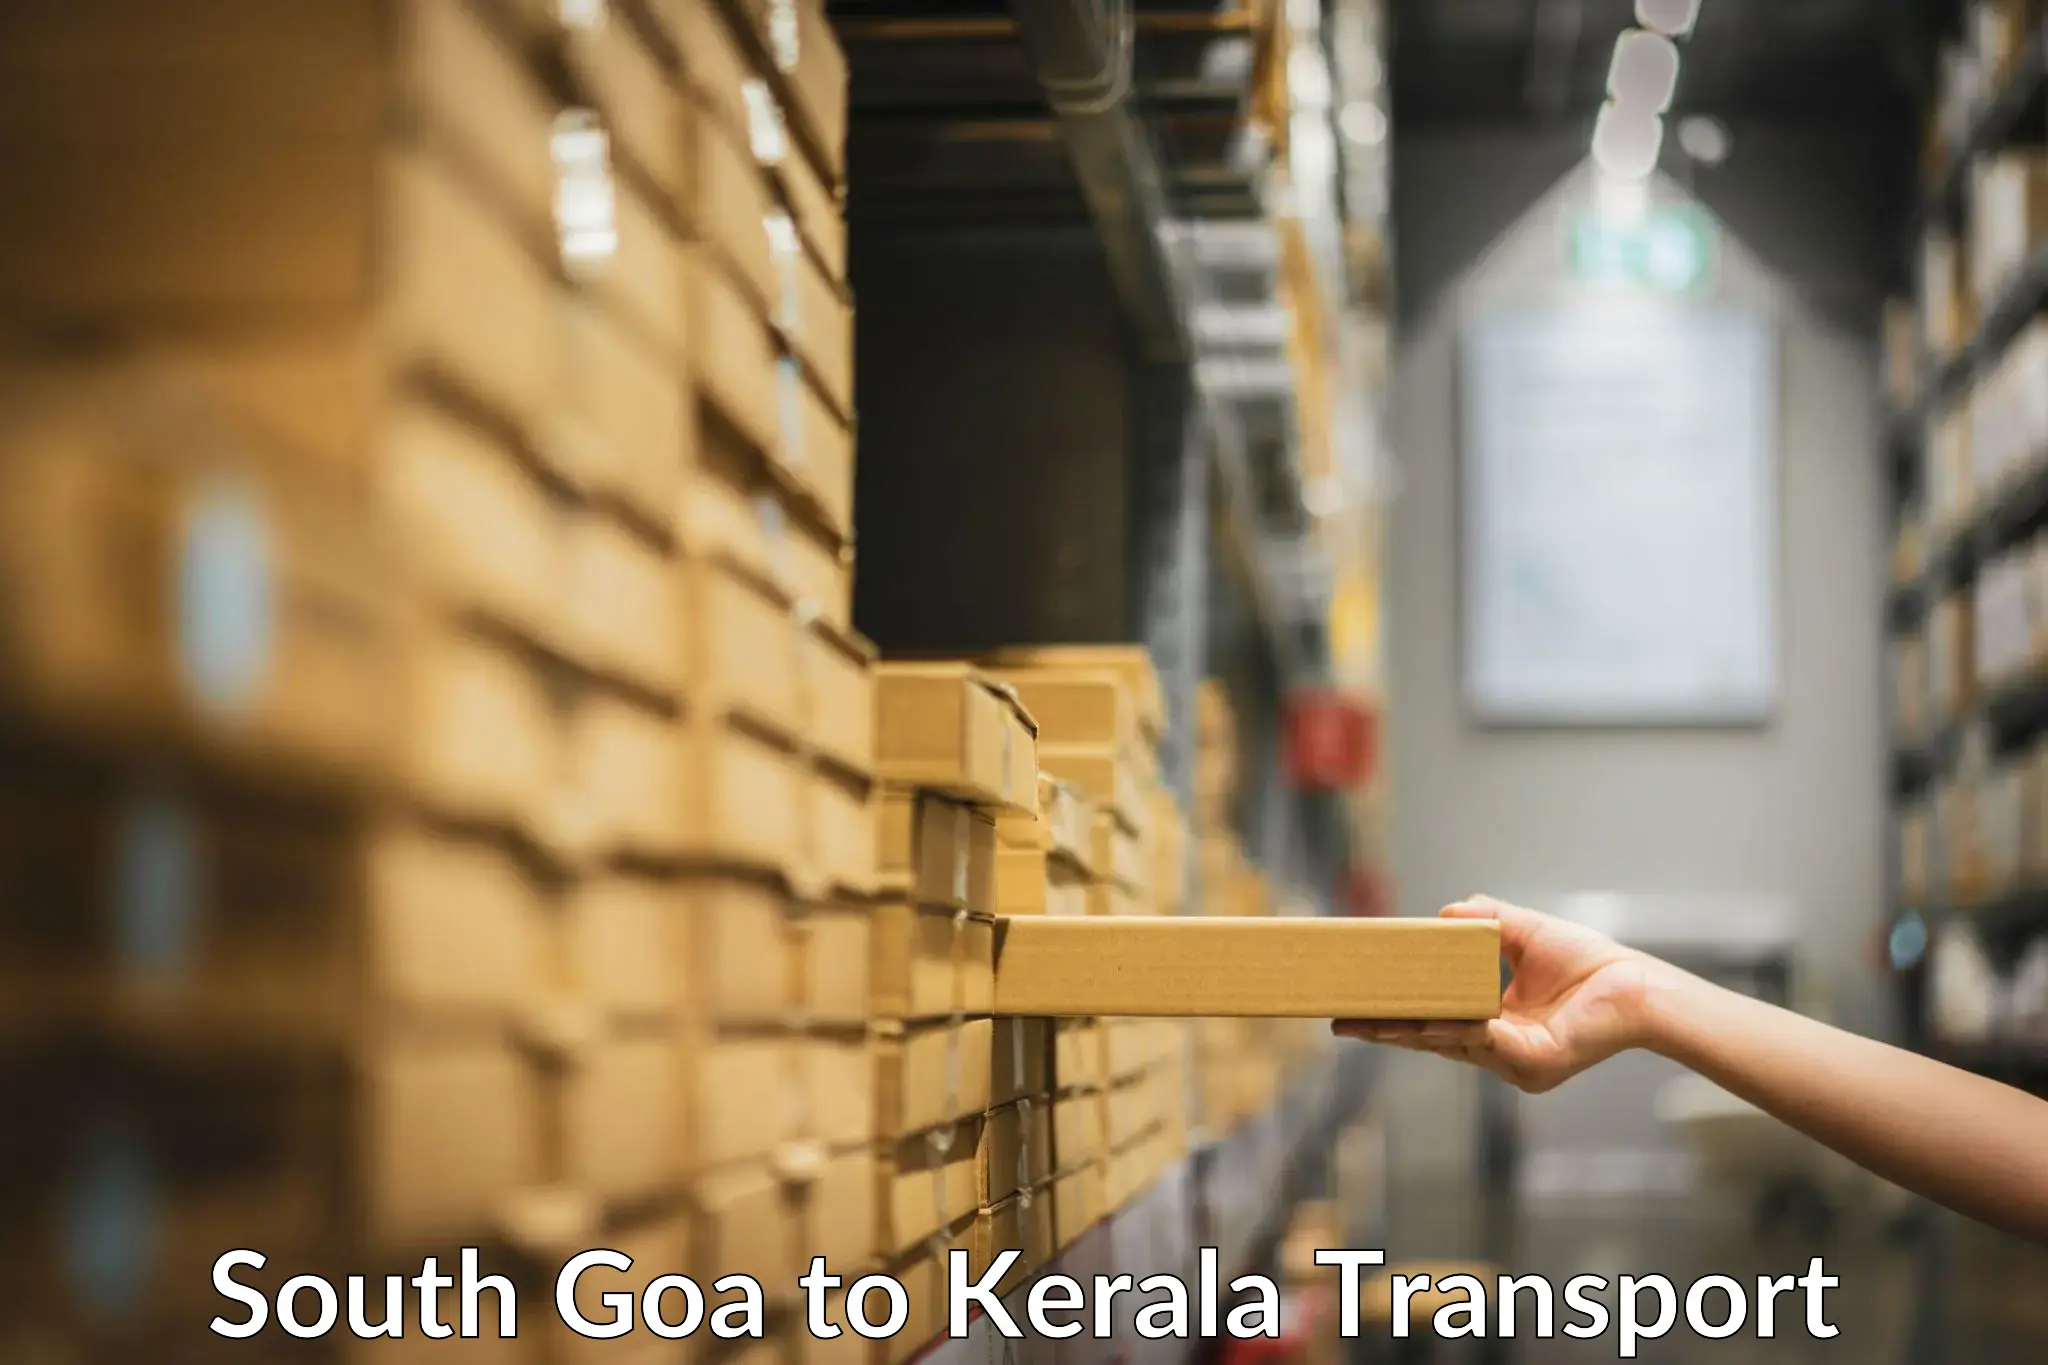 Transport bike from one state to another South Goa to Kerala